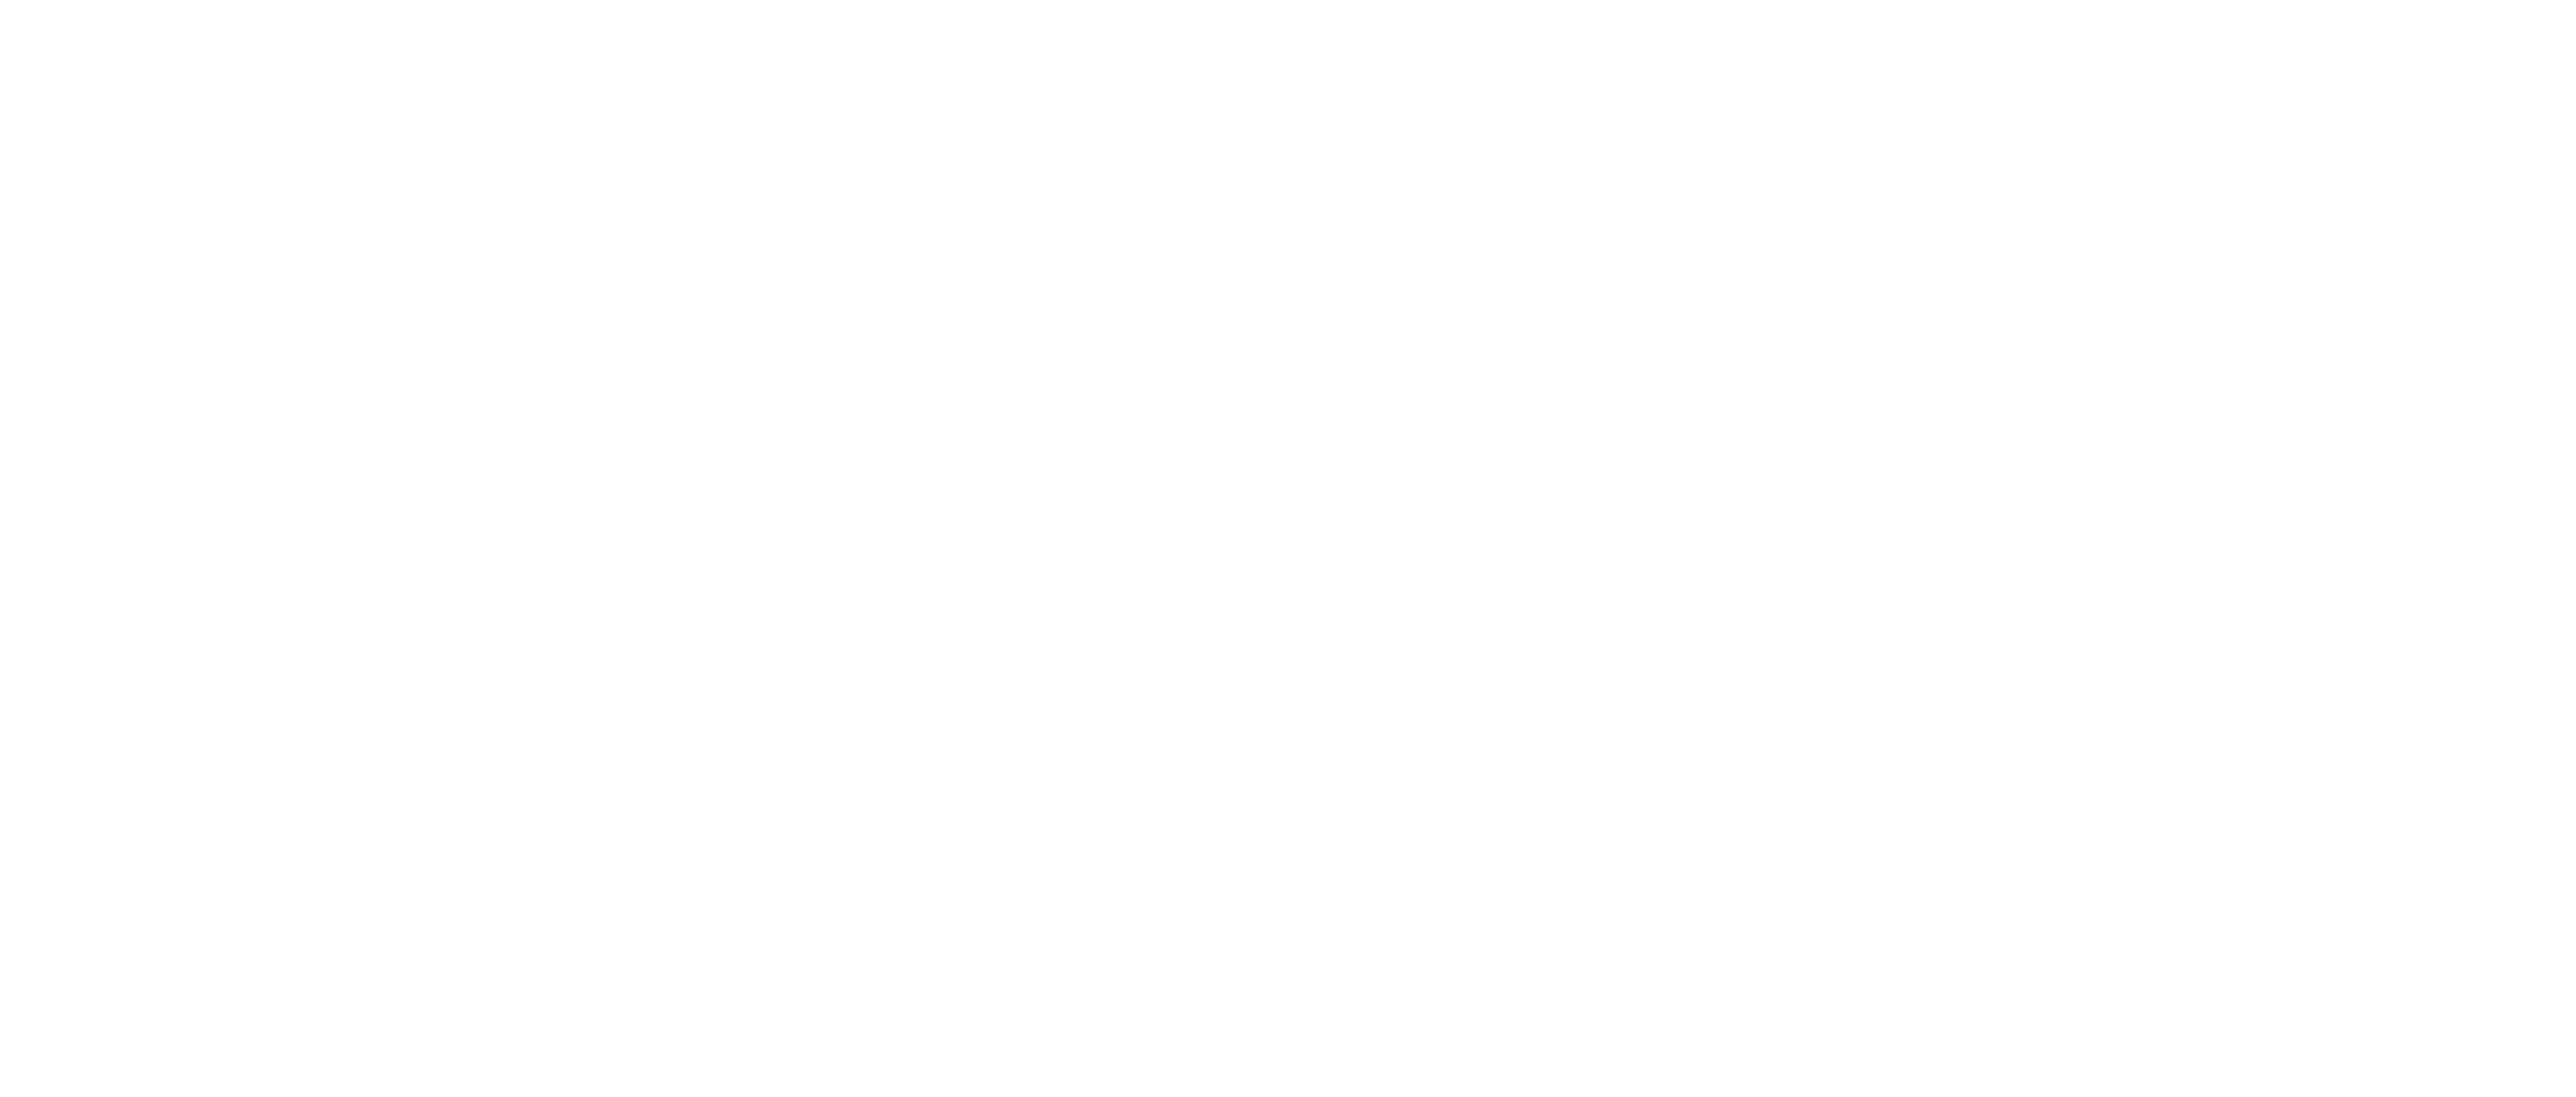 Not My Fault: Mexico logo